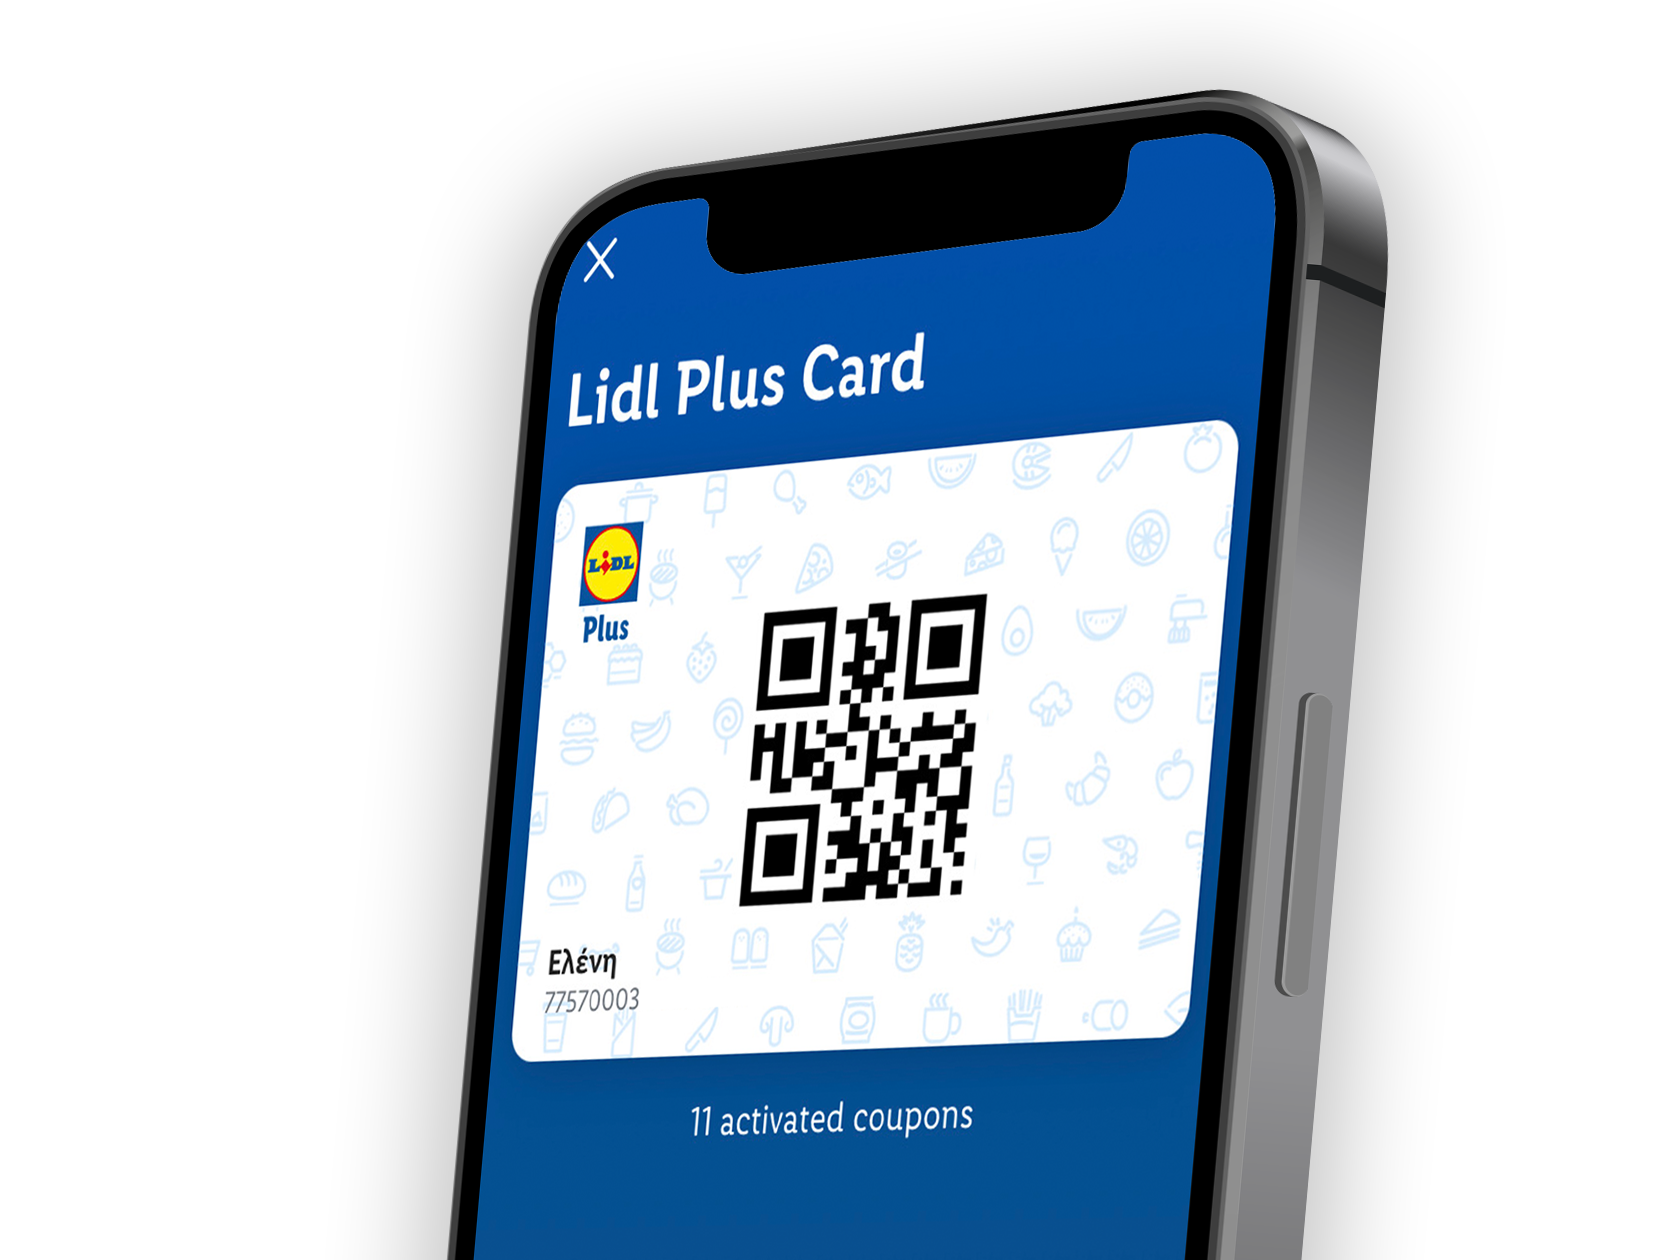 What is the Lidl Plus card?